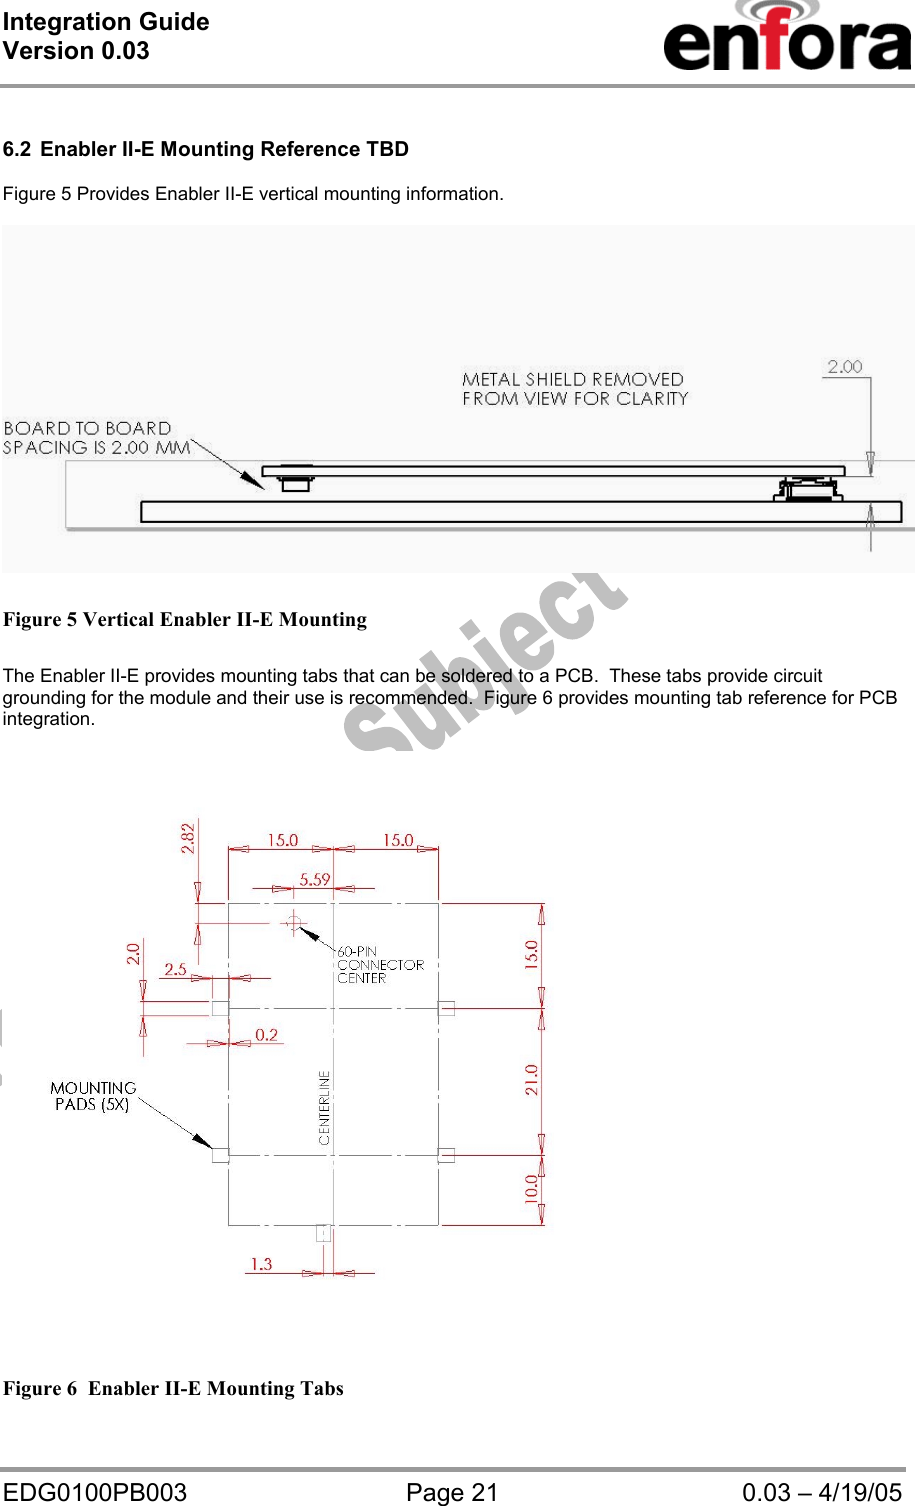 Integration Guide  Version 0.03   EDG0100PB003  Page 21  0.03 – 4/19/05  6.2  Enabler II-E Mounting Reference TBD  Figure 5 Provides Enabler II-E vertical mounting information.   Figure 5 Vertical Enabler II-E Mounting   The Enabler II-E provides mounting tabs that can be soldered to a PCB.  These tabs provide circuit grounding for the module and their use is recommended.  Figure 6 provides mounting tab reference for PCB integration.    Figure 6  Enabler II-E Mounting Tabs 